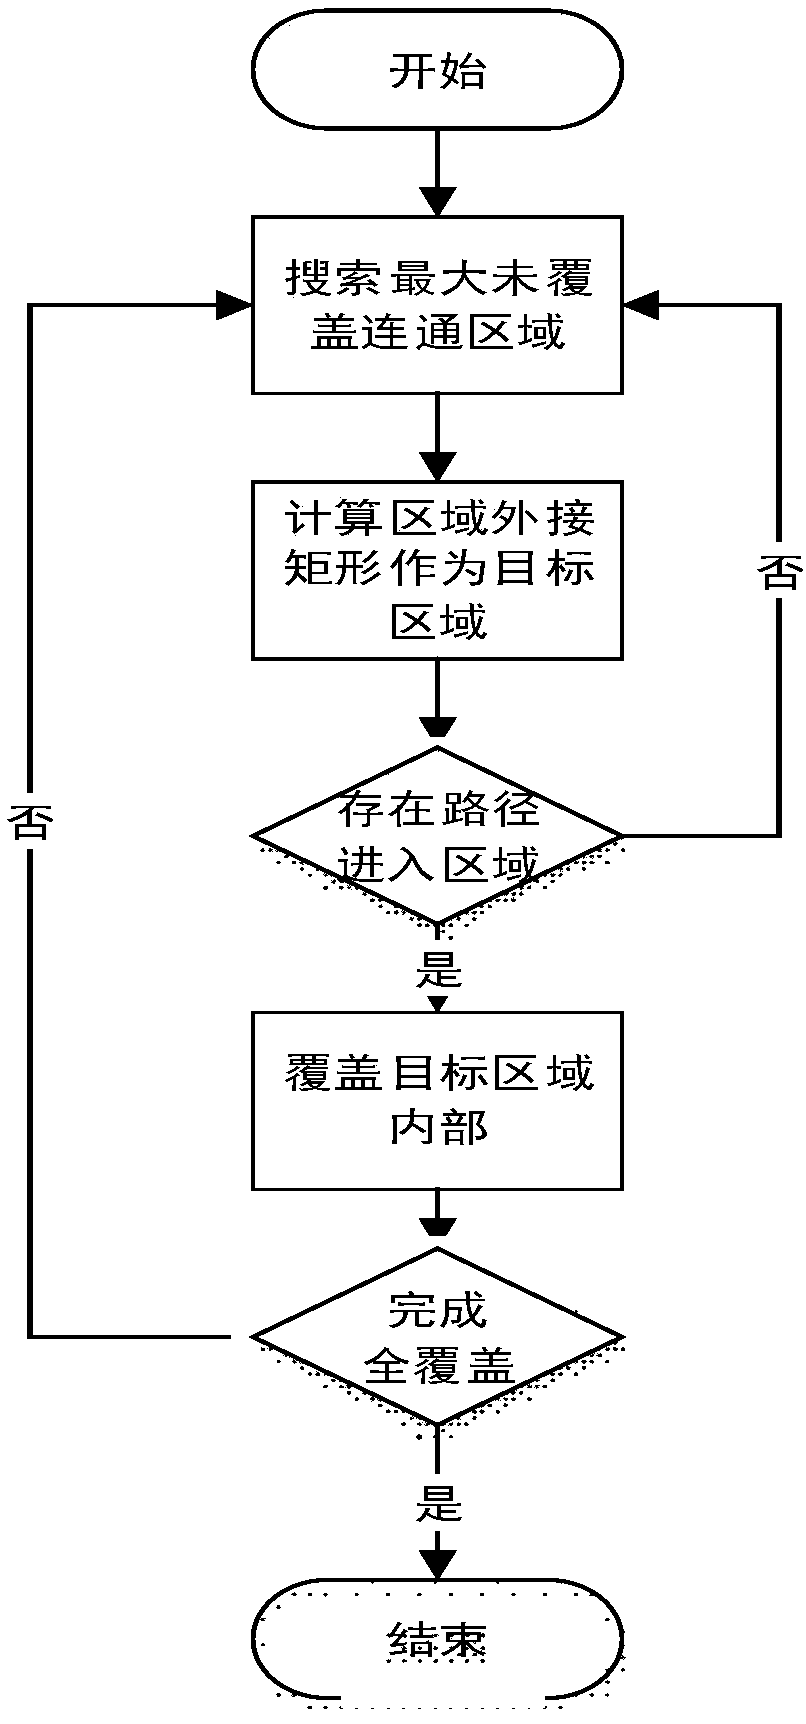 Full-coverage path planning method of mobile robot